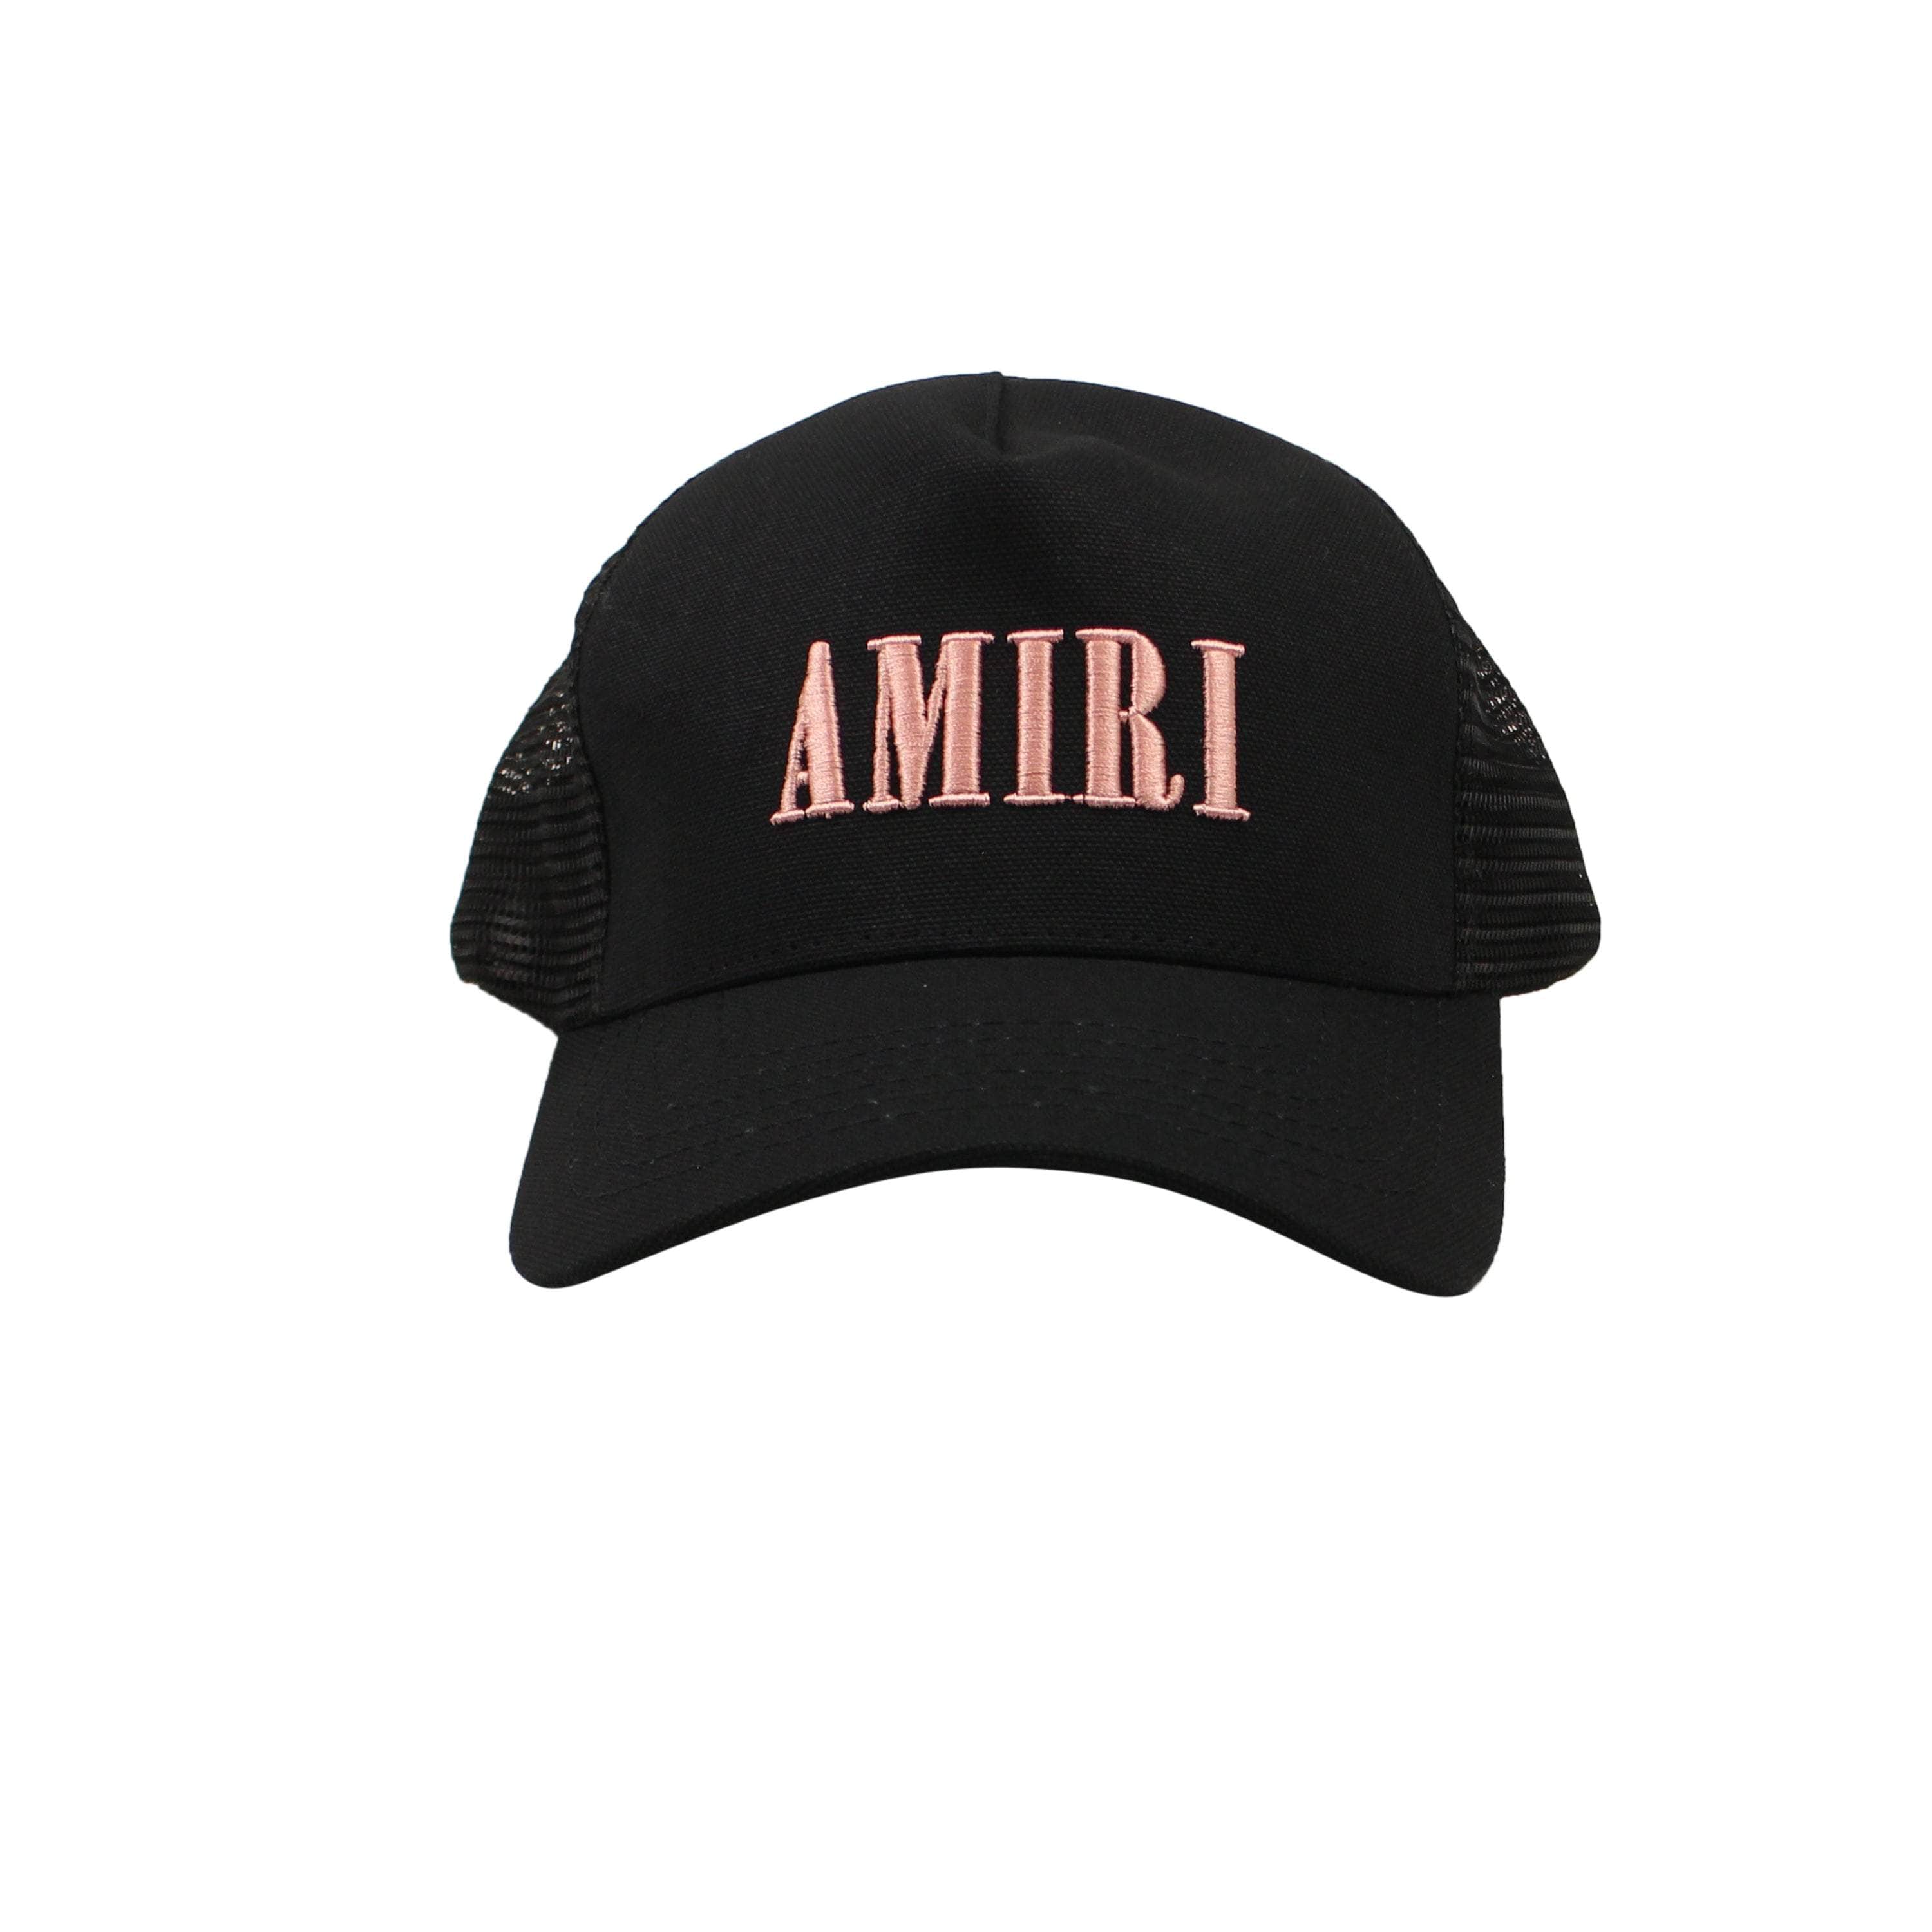 Amiri amiri, channelenable-all, chicmi, couponcollection, main-accessories, shop375, Stadium Goods, stadiumgoods, under-250 OS CORE LOGO TRUCKER HAT Black&Peach Hats AMR-XACC-0120/OS AMR-XACC-0120/OS